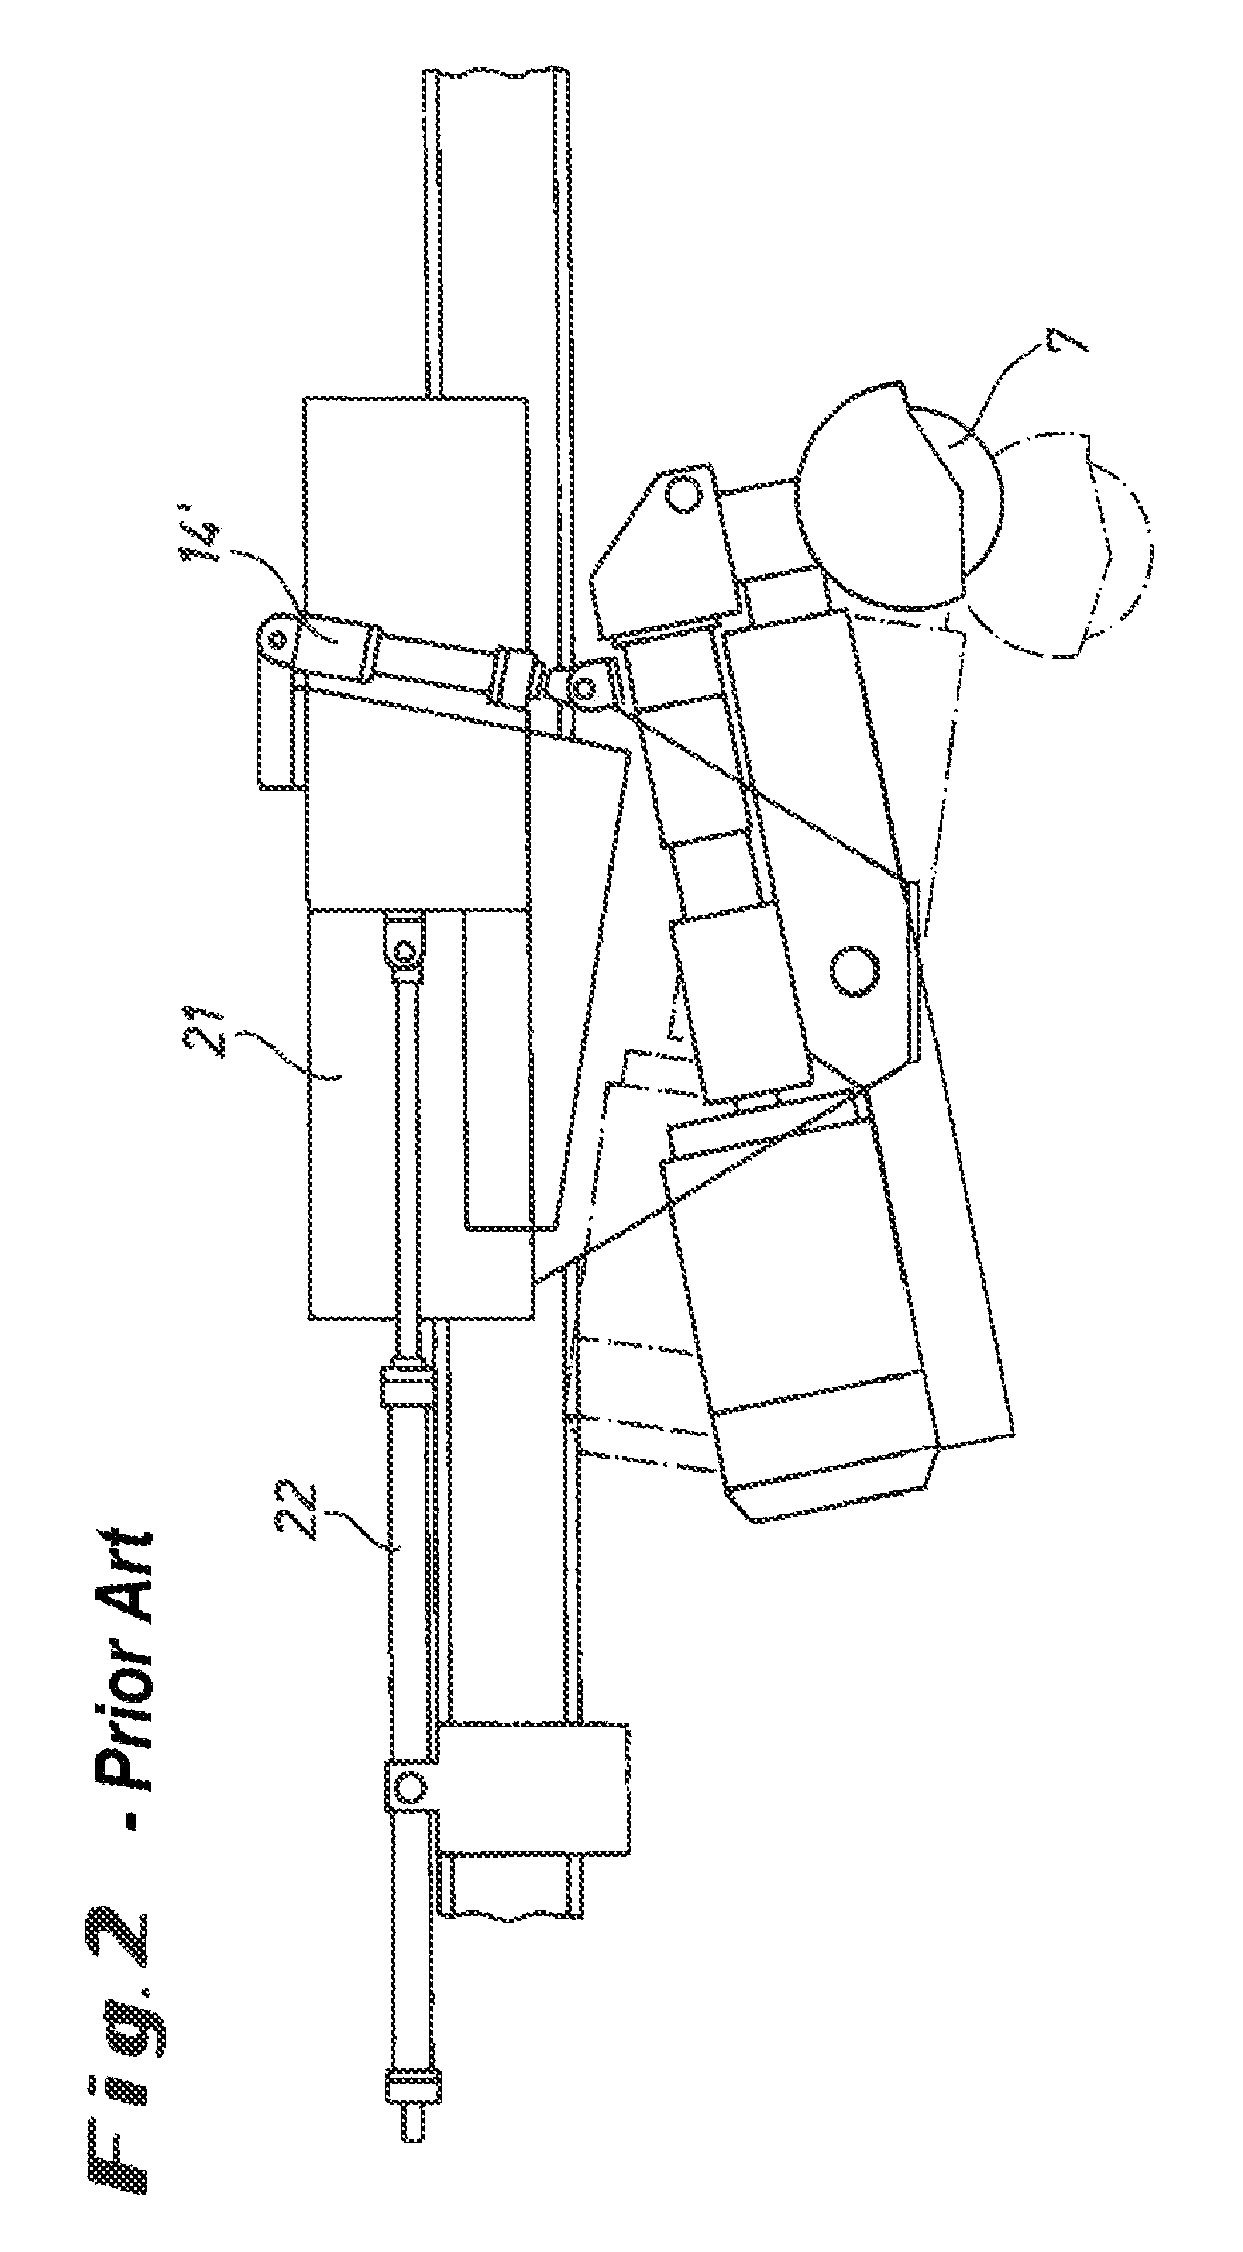 Method and apparatus for grinding a continuously casting product